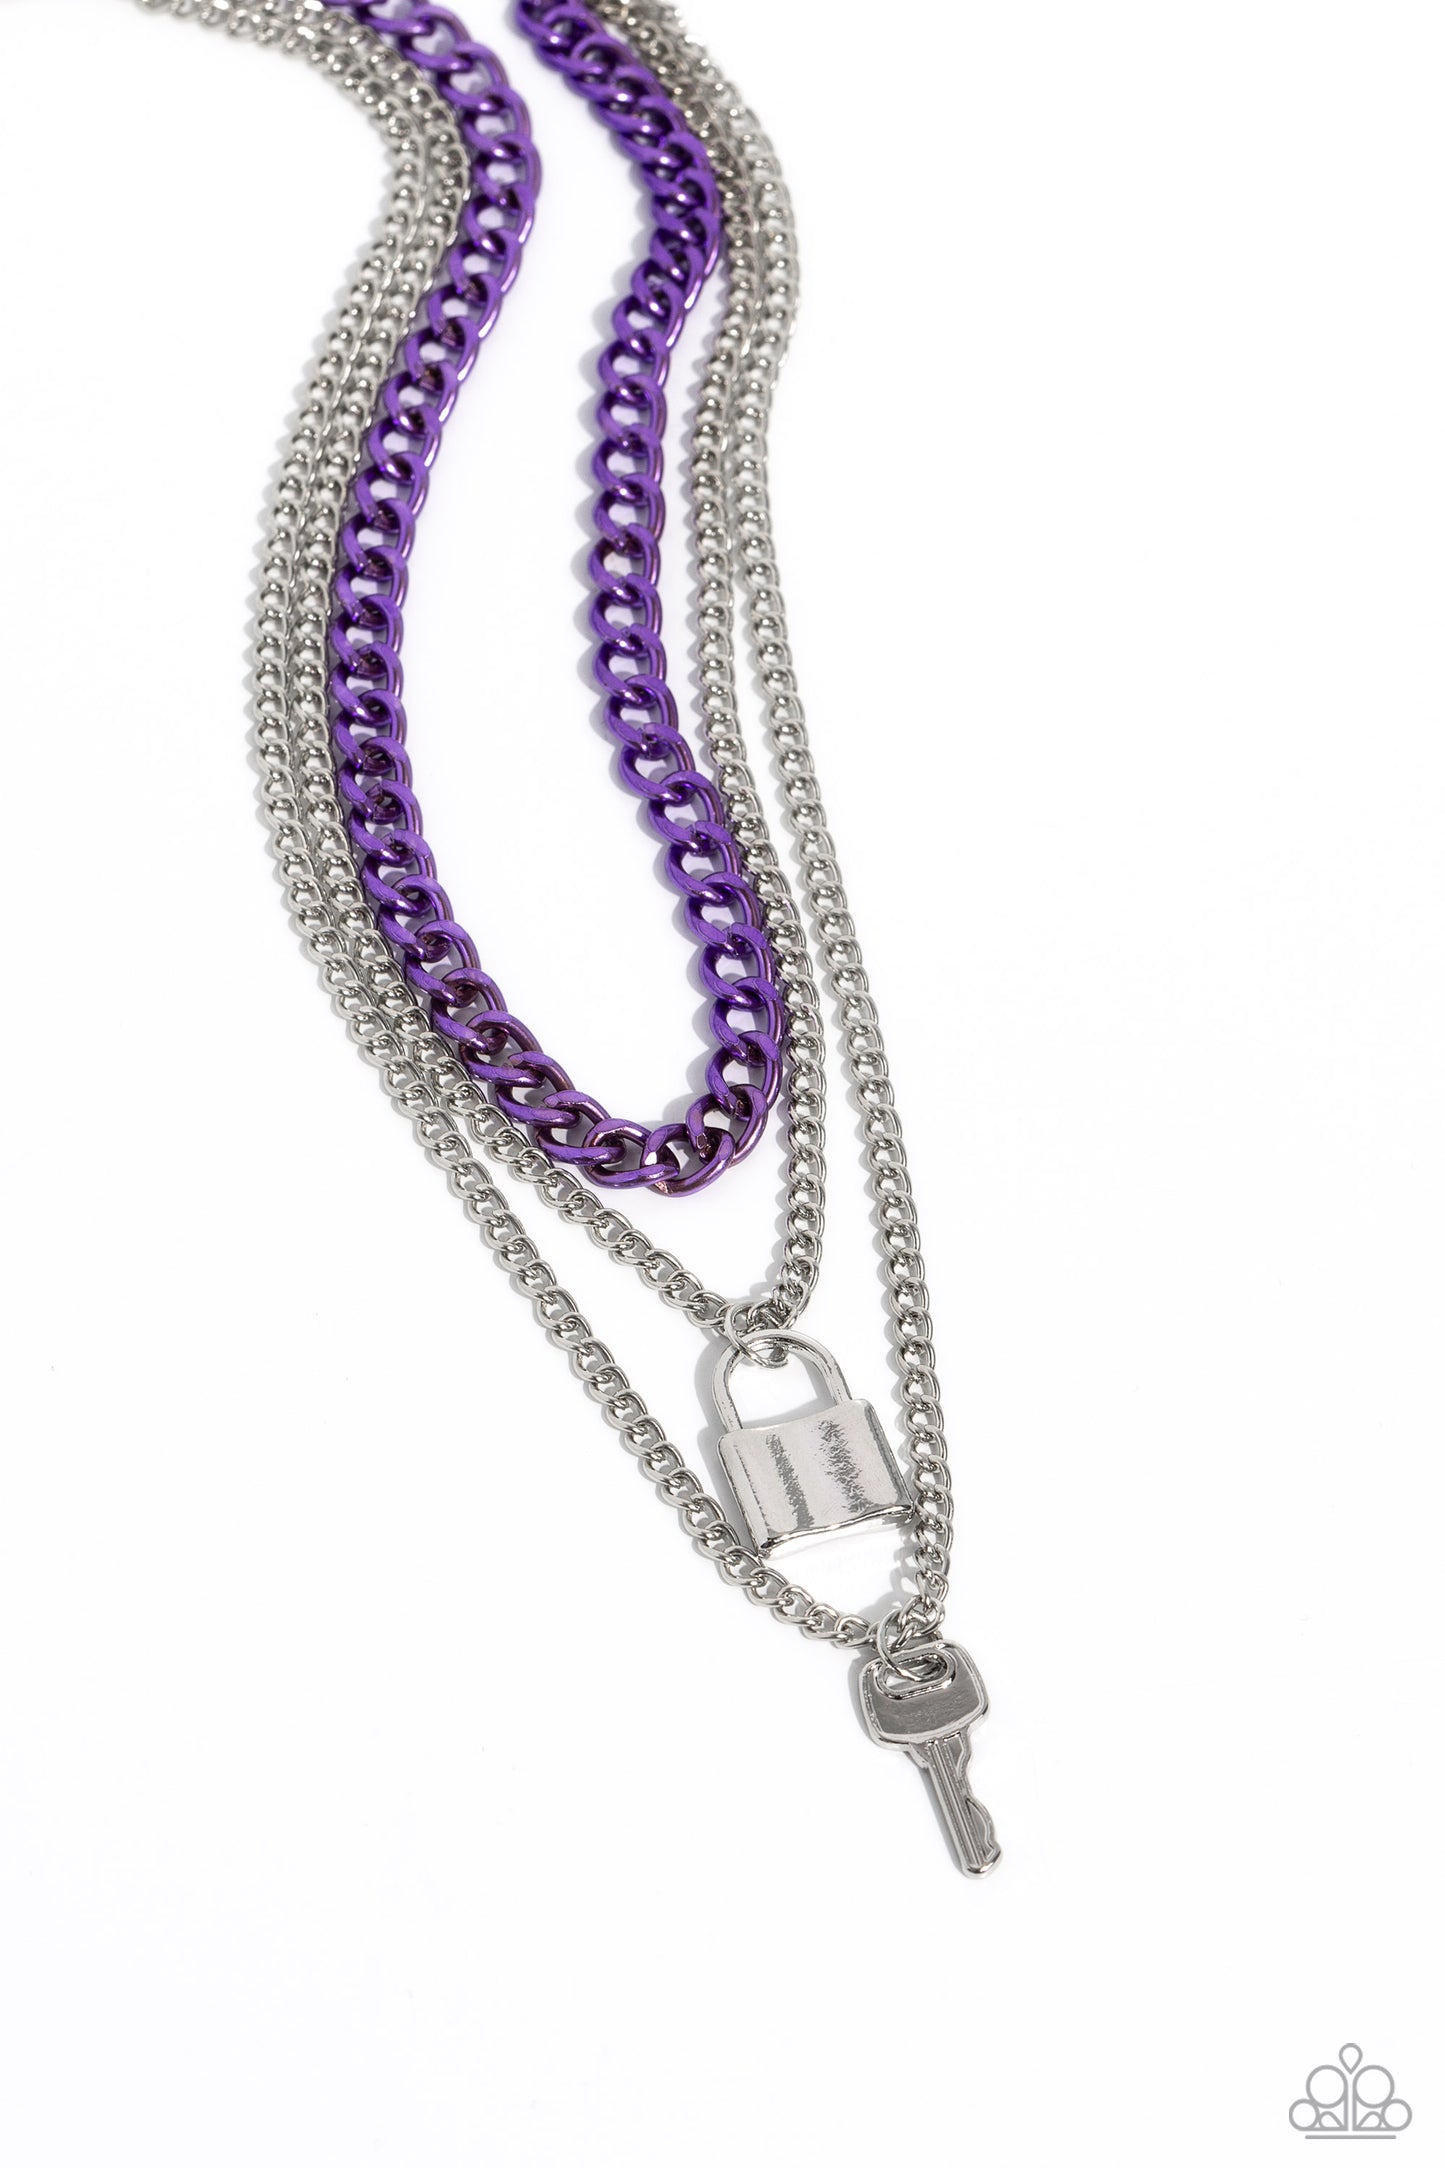 Paparazzi Accessories - Locked Labor - Purple Necklaces a sleek silver lock and silver key trickle from the bottoms of glistening silver chains down the chest, creating industrial layers. A purple curb chain hangs above the pendants for a touch of colorfully gritty sheen. Features an adjustable clasp closure.  Sold as one individual necklace. Includes one pair of matching earrings.